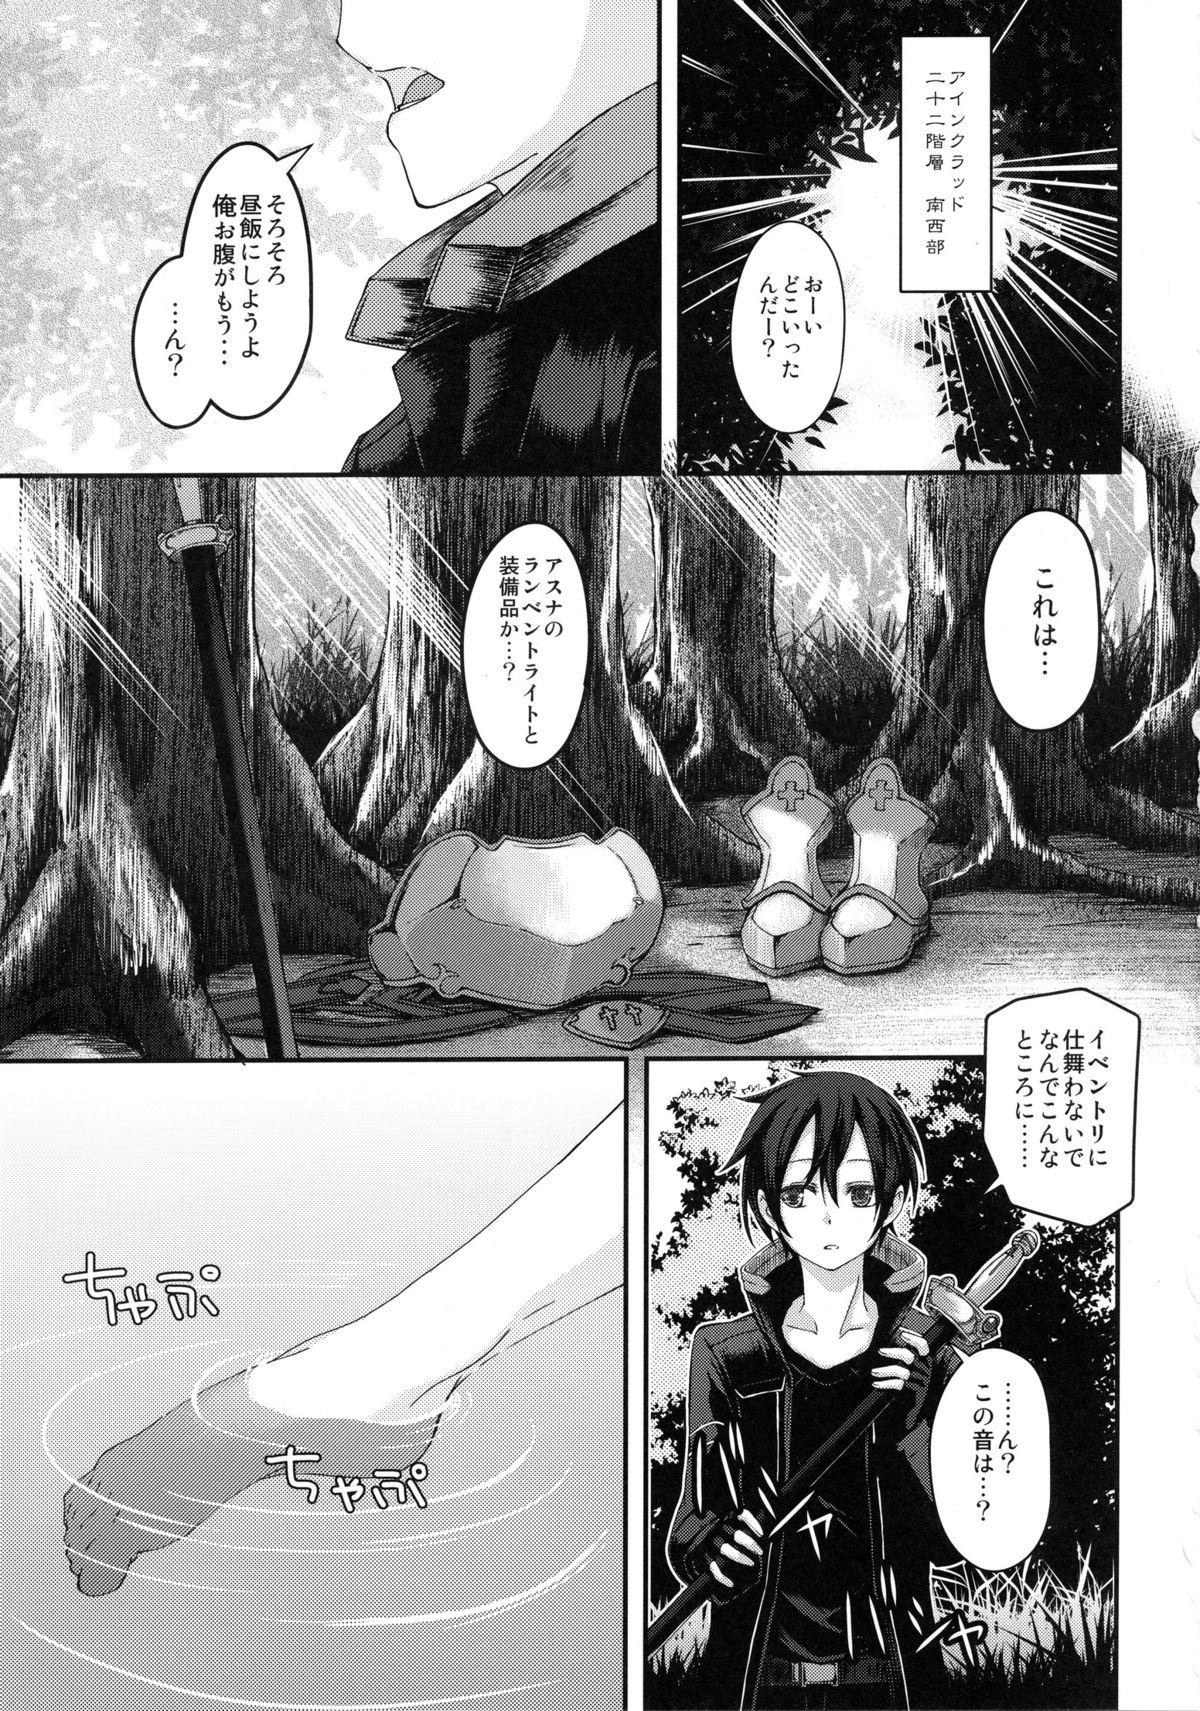 Lesbians Marriage Experience - Sword art online Rico - Page 2